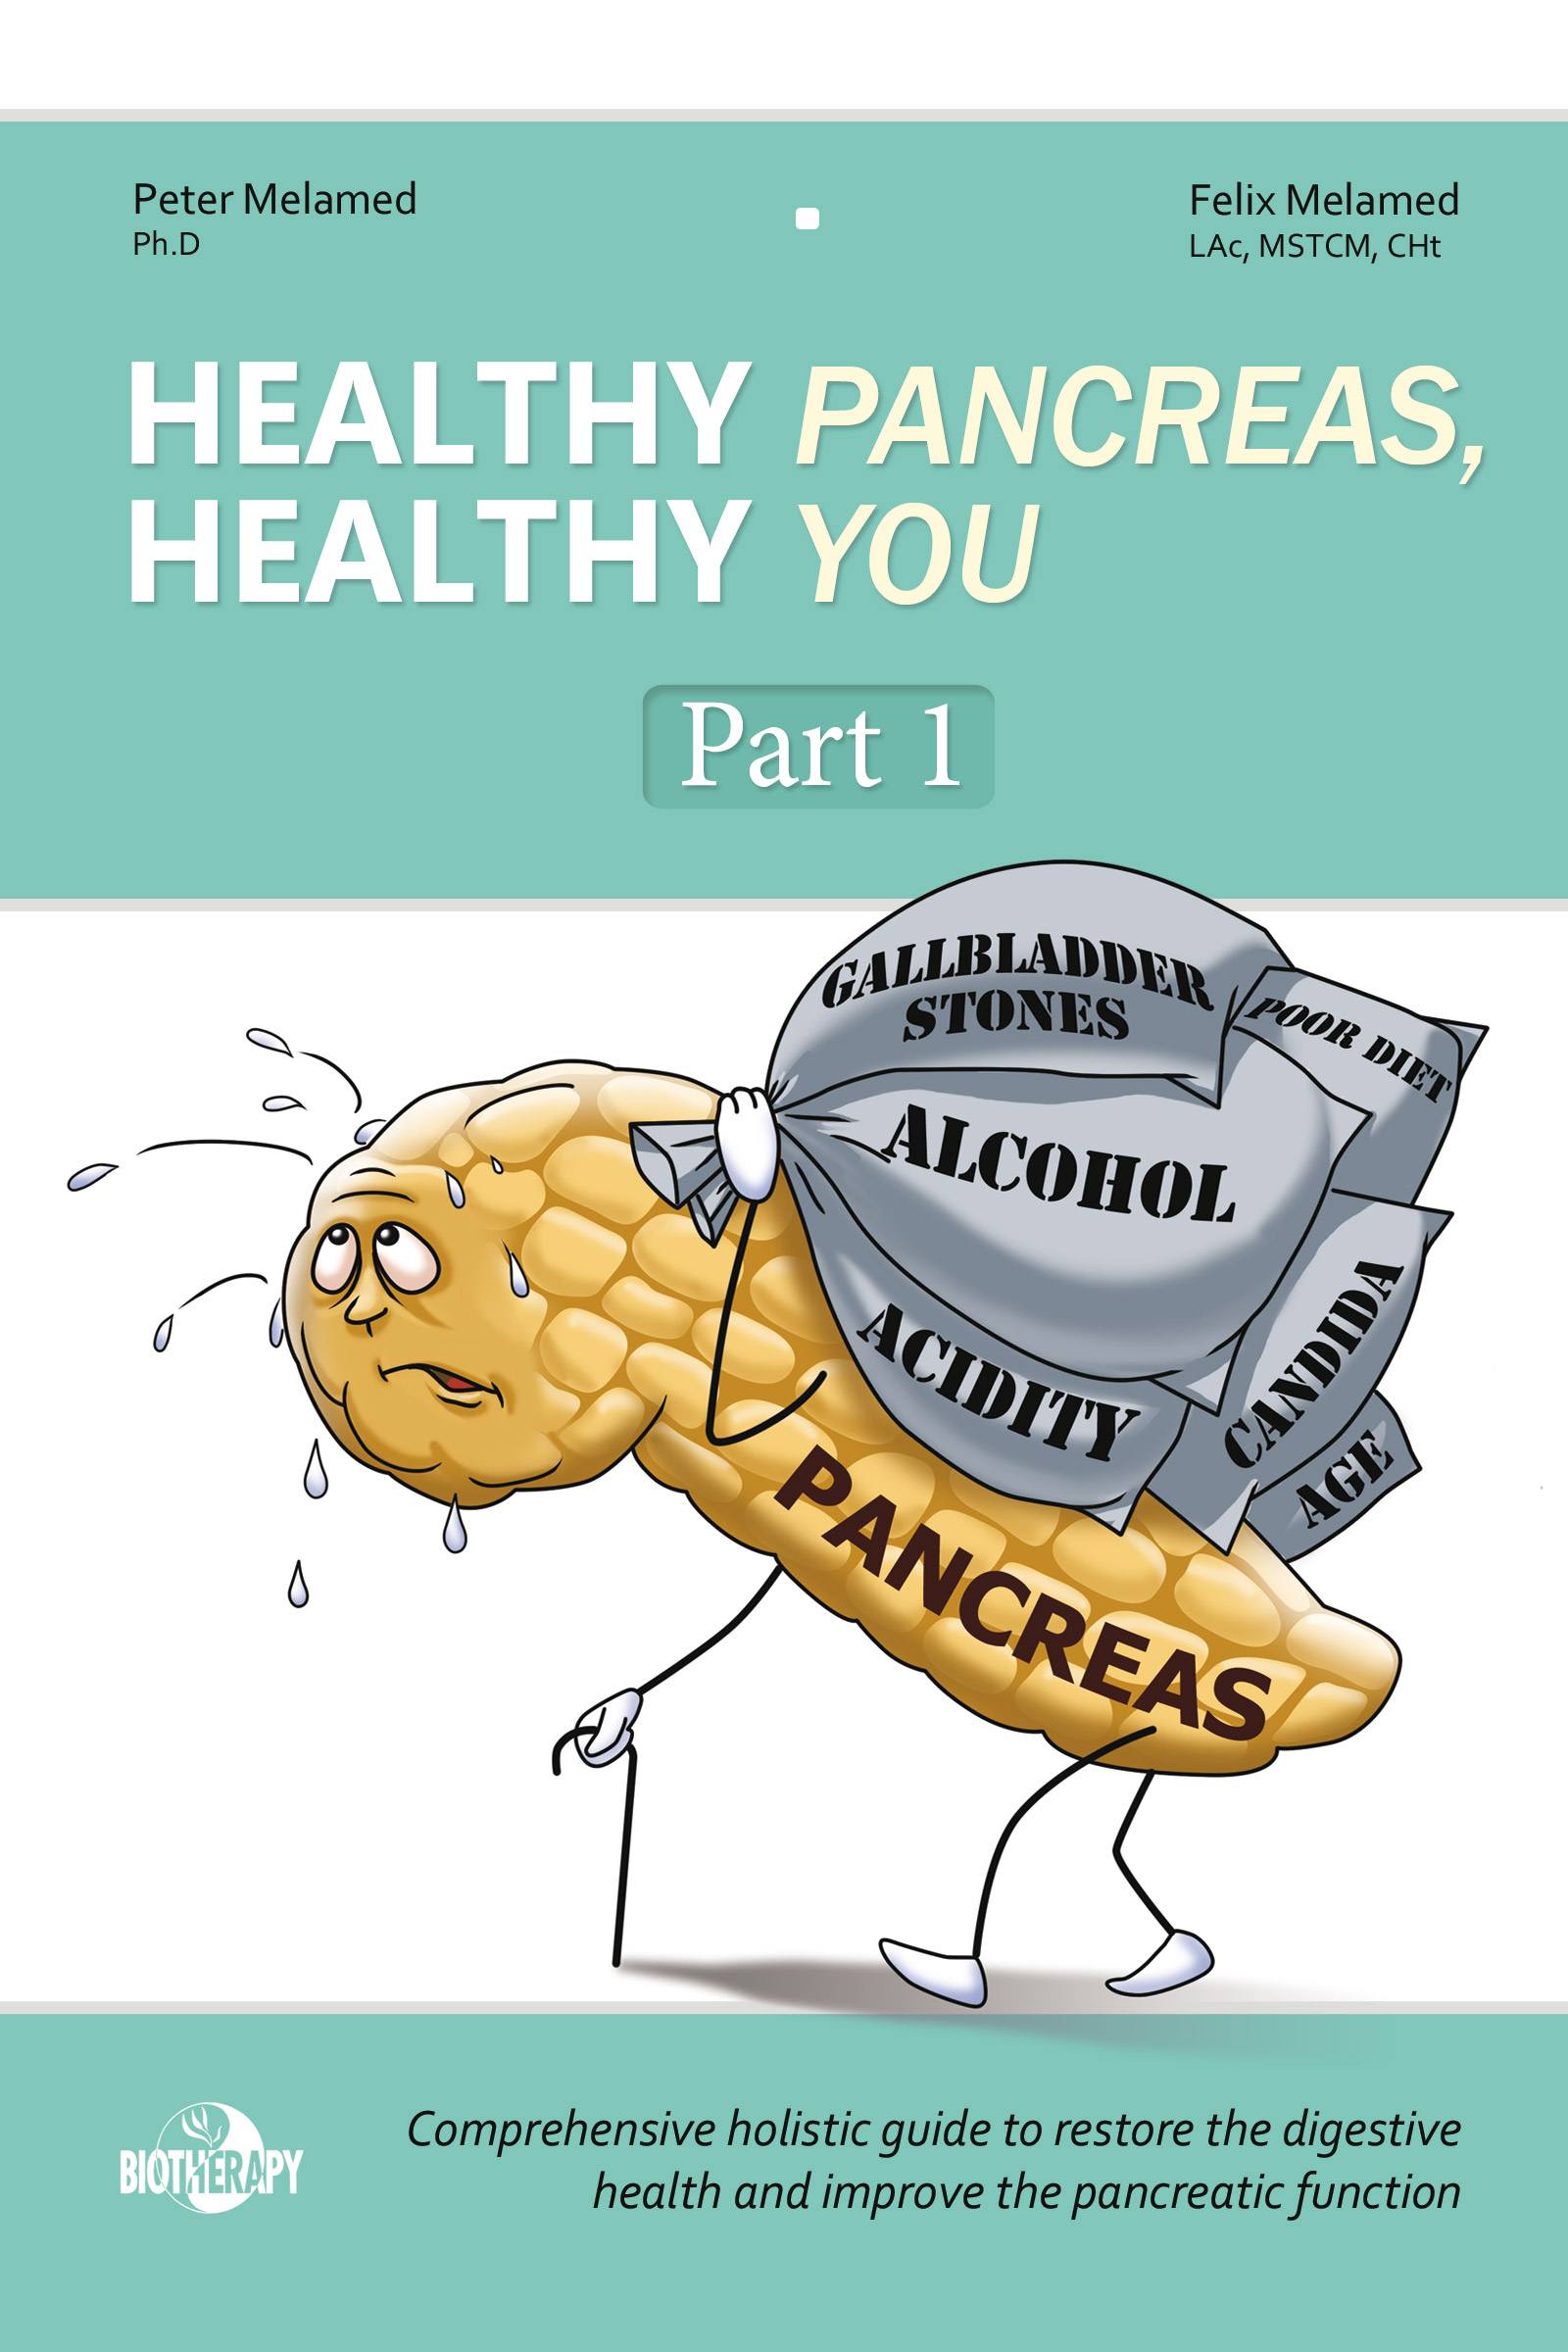 "Healthy Pancreas, Healthy You" Part 1 ebook by Peter Melamed, PhD practitioner at Biotherapy Clinic in San Francisco Bay Area. Available online at www.biotherapystore.com